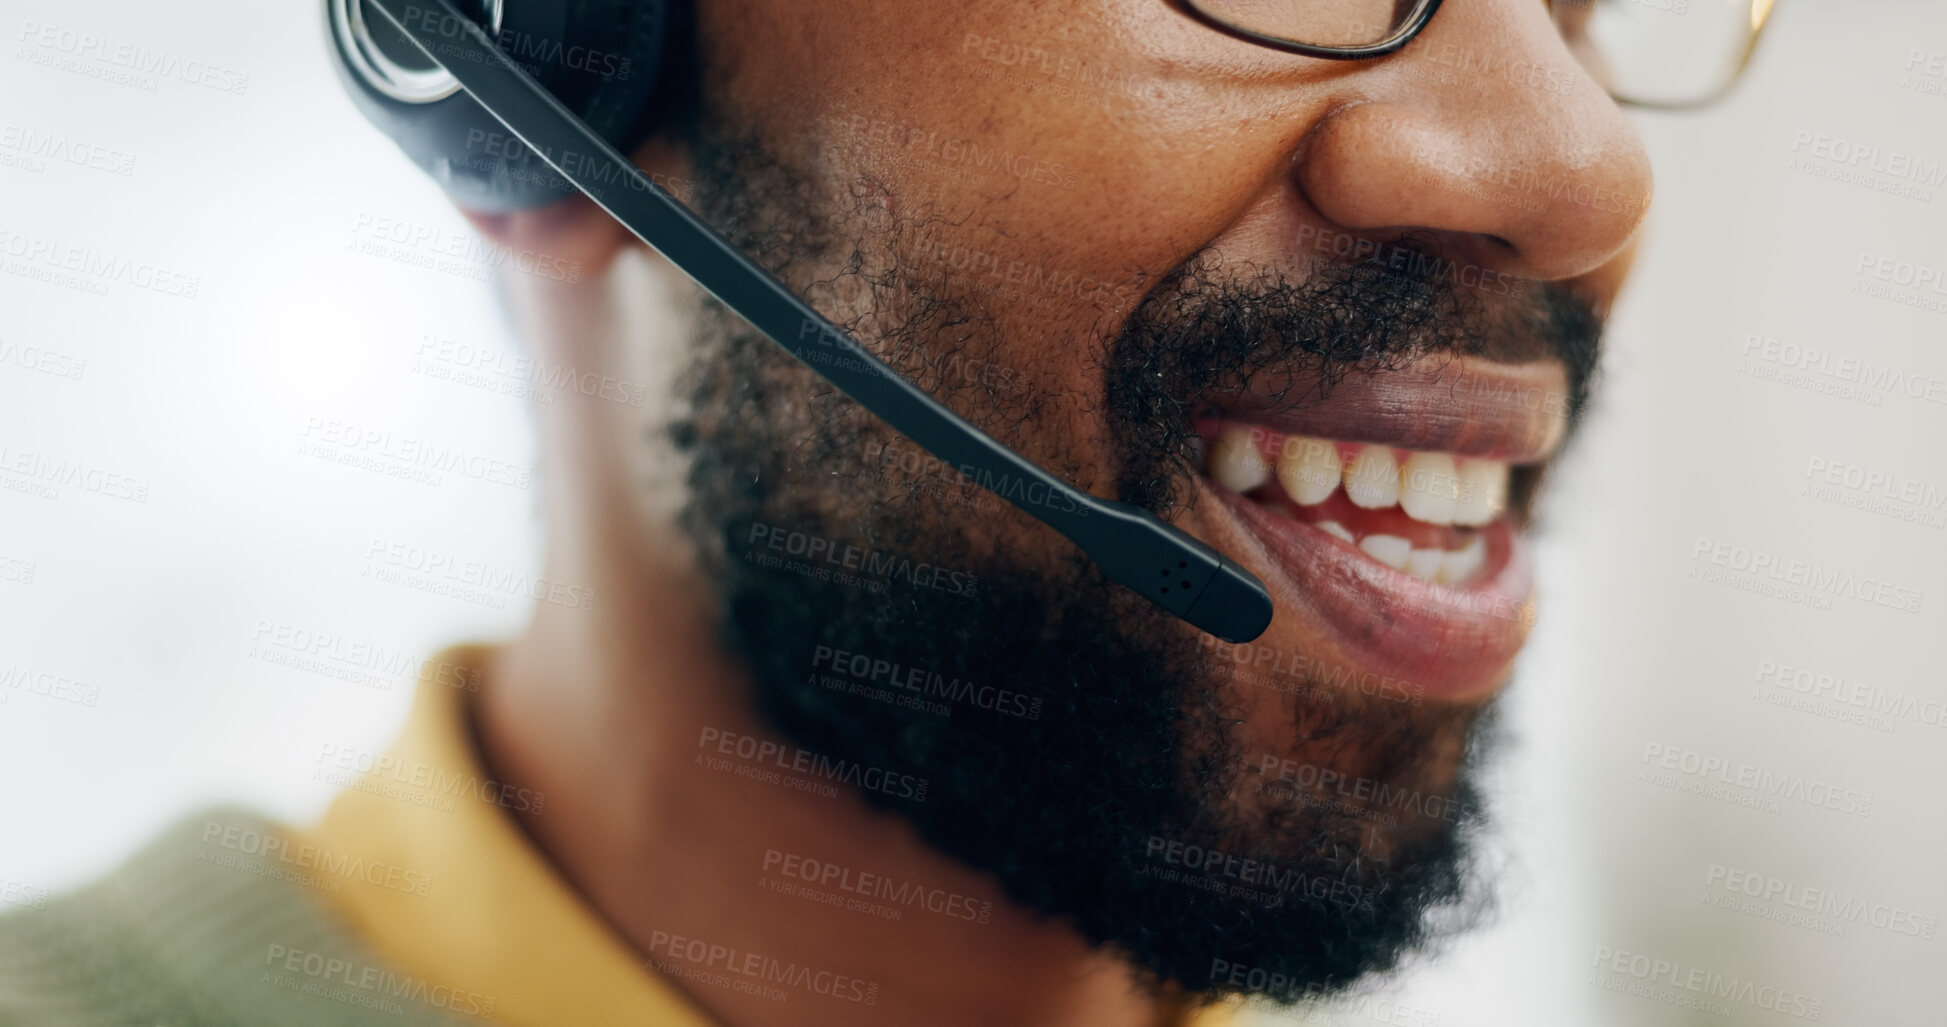 Buy stock photo Call center headset, mouth and professional man speaking on telemarketing, sales pitch or customer care support. Help desk closeup, communication microphone and agent consulting on advisory service